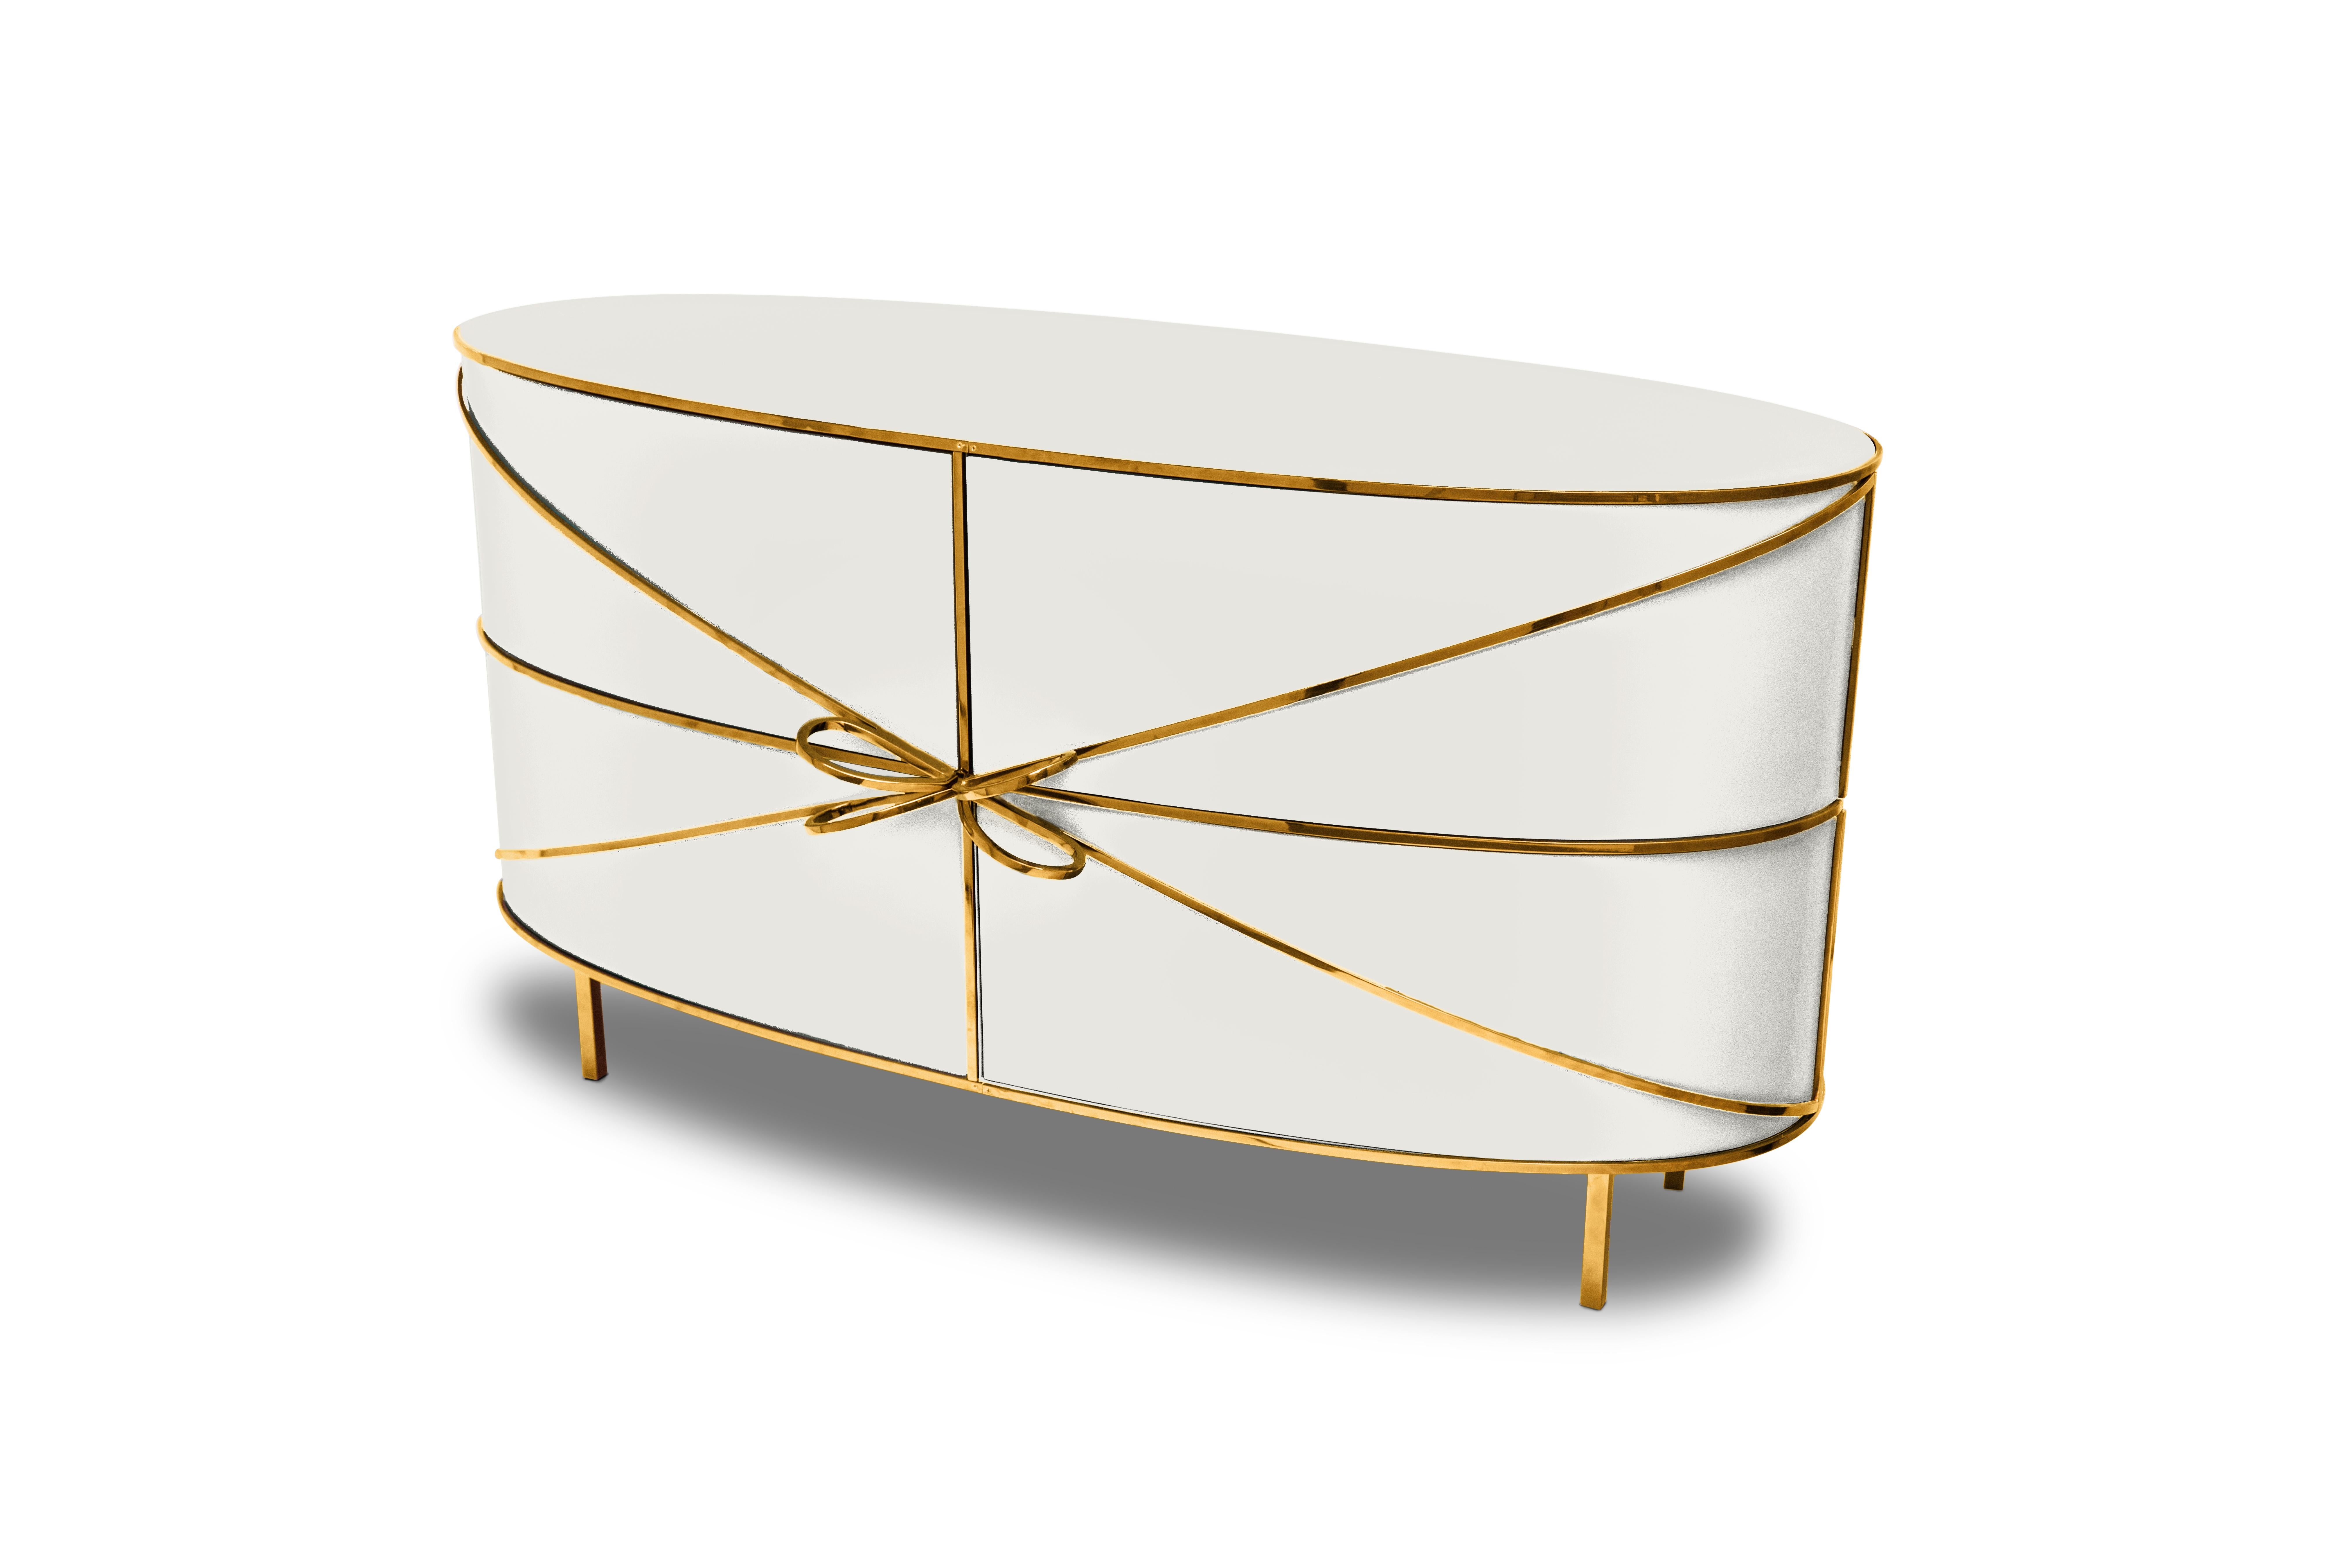 88 Secrets White Sideboard with Gold Trims Nika Zupanc is a pristine white cabinet in sensuous, feminine lines with luxurious gold metal trims. A statement piece in any interior space!

Nika Zupanc, a strikingly renowned Slovenian designer, never